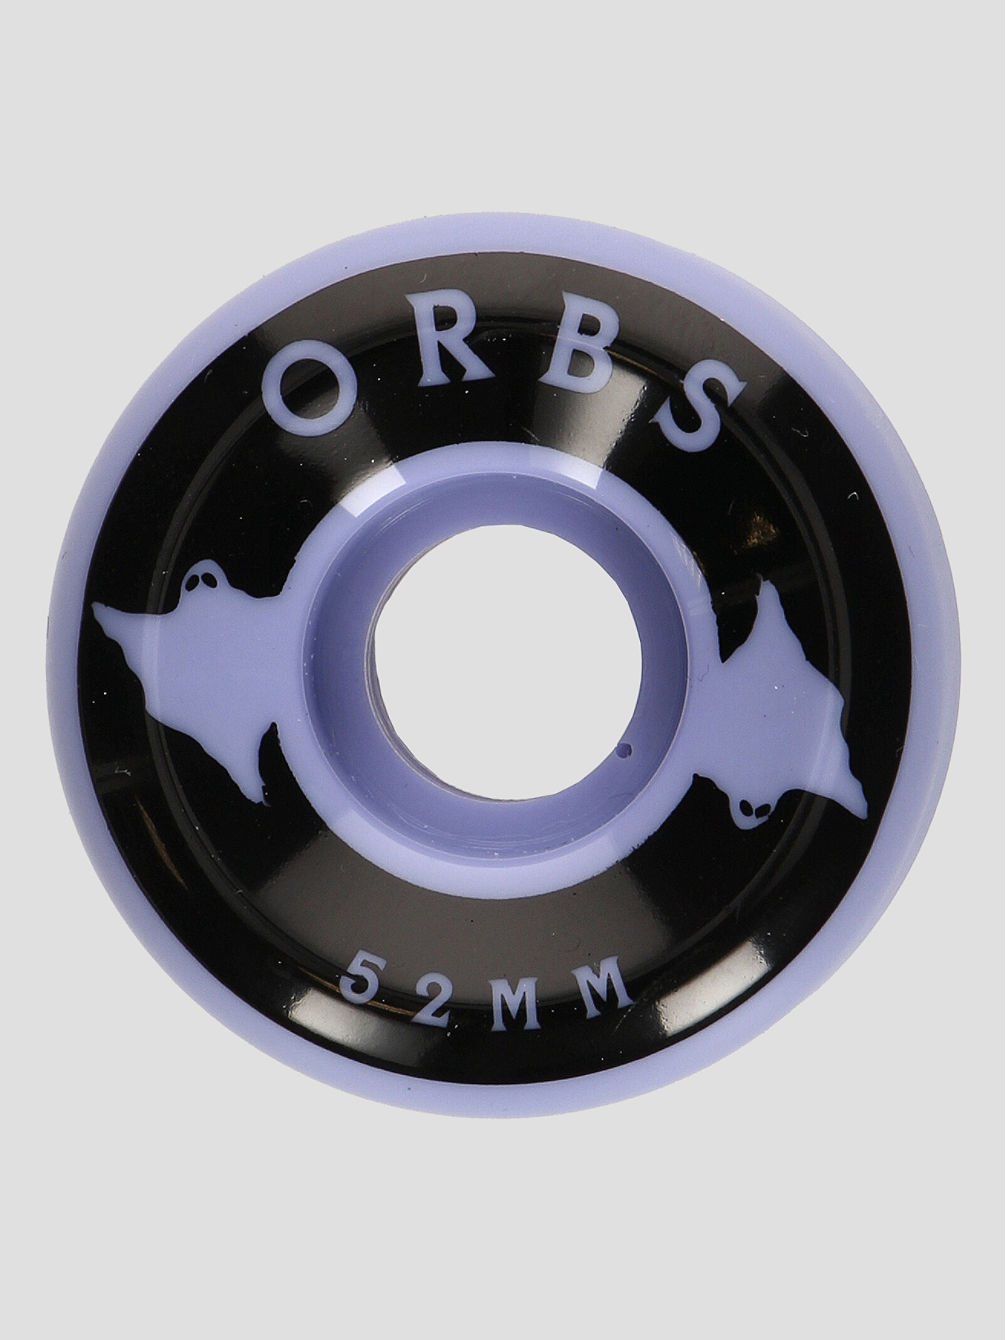 Orbs Specters - Conical - 99A 52mm Rodas